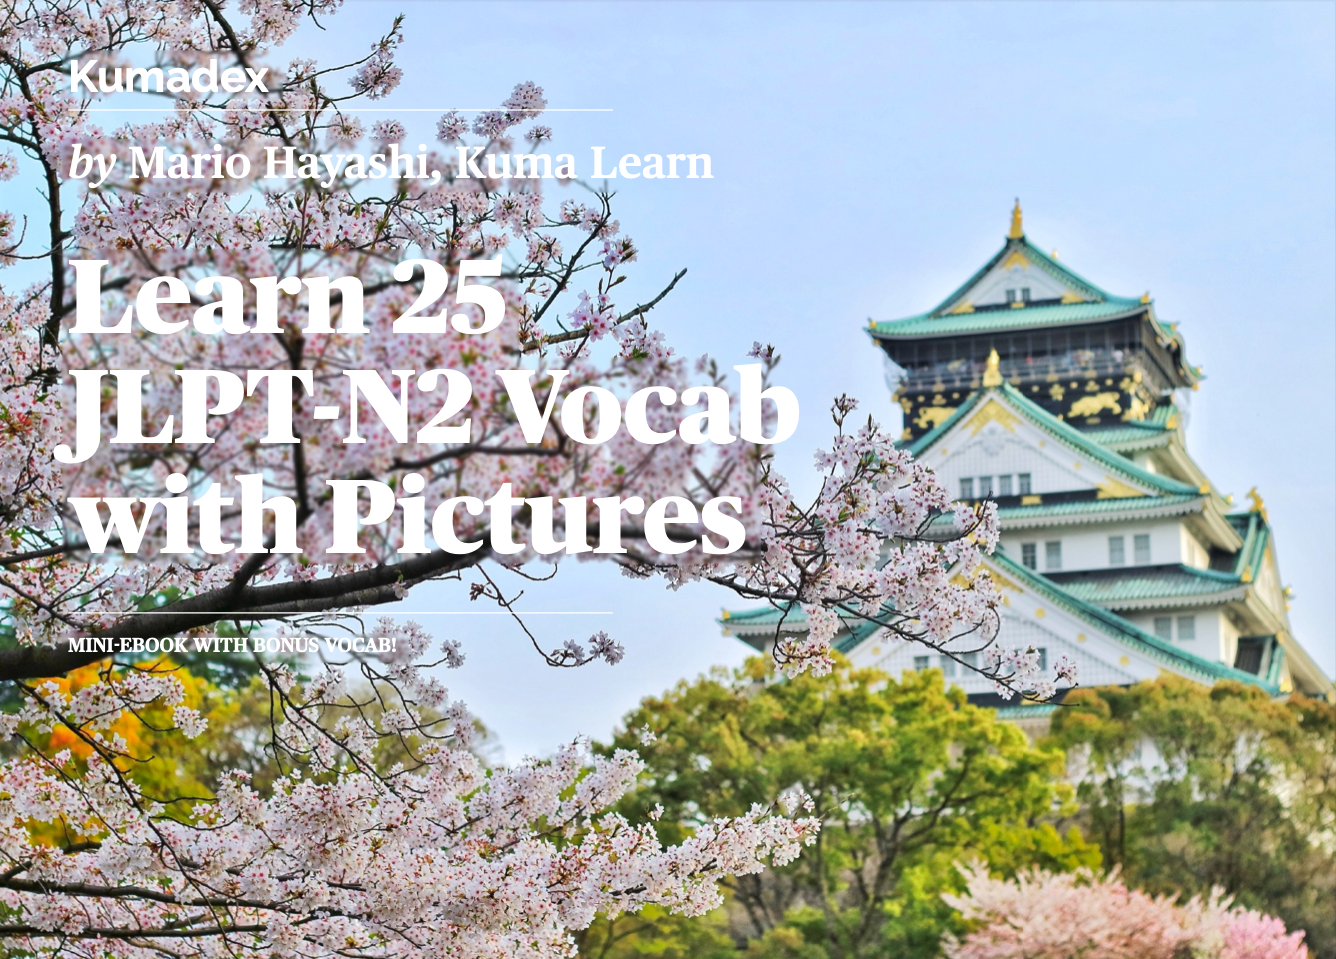 I carefully selected frequently occurring 25 JLPT-N2 words in this mini-eBook to start your visual learning journey.